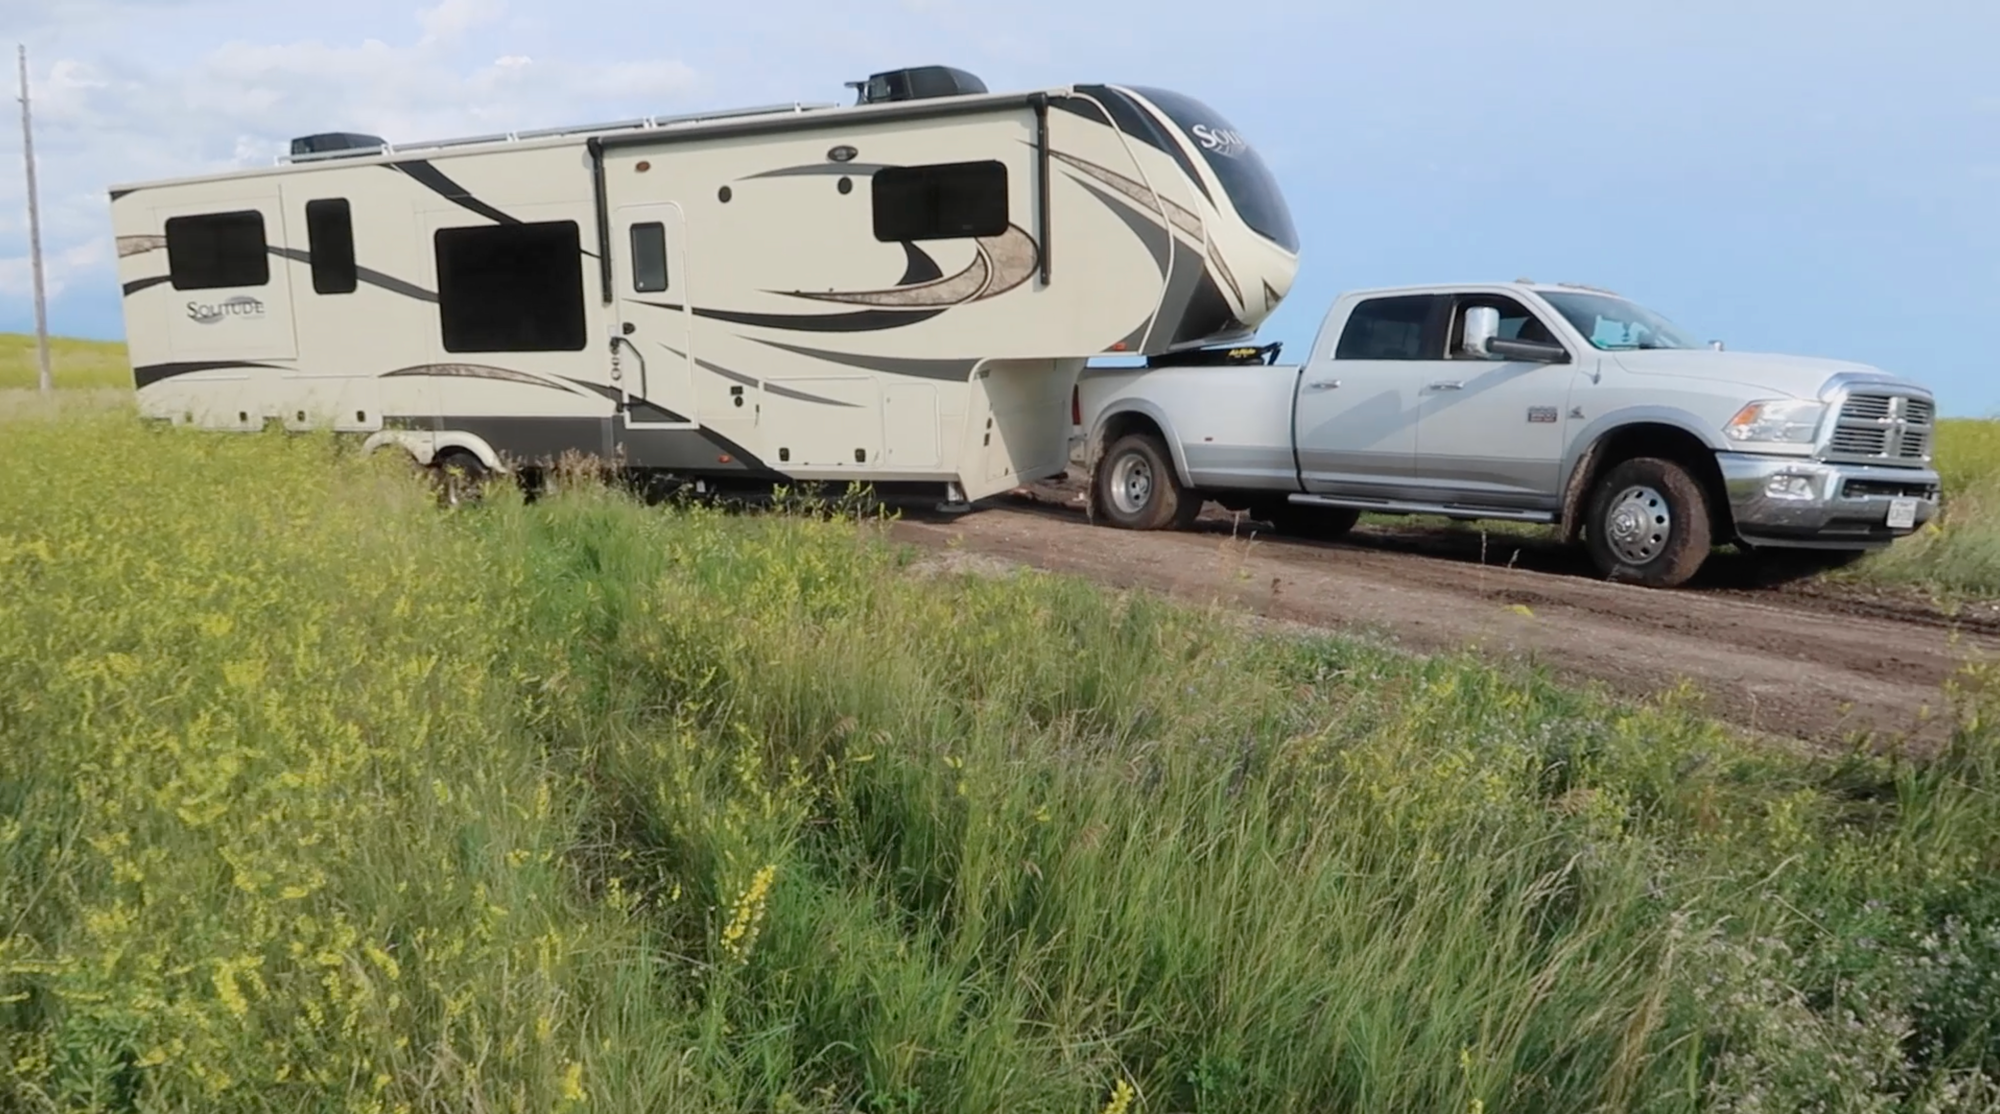 We’ve all made mistakes, us included! This is our RV getting stuck in unlevel terrain before we knew any better.